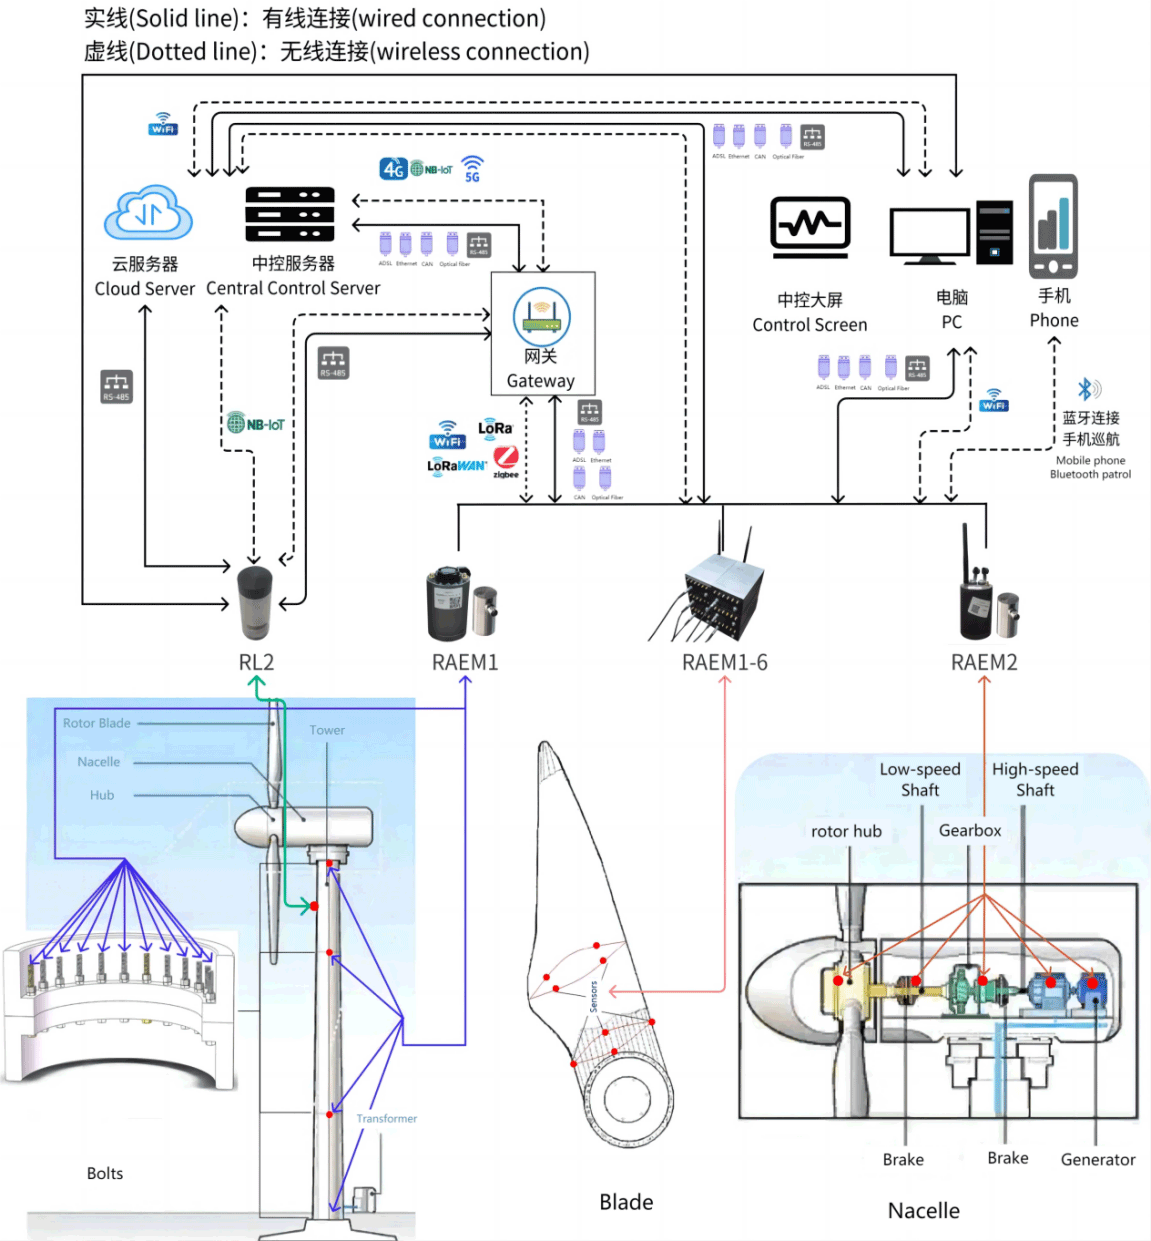 System Connection and Communication